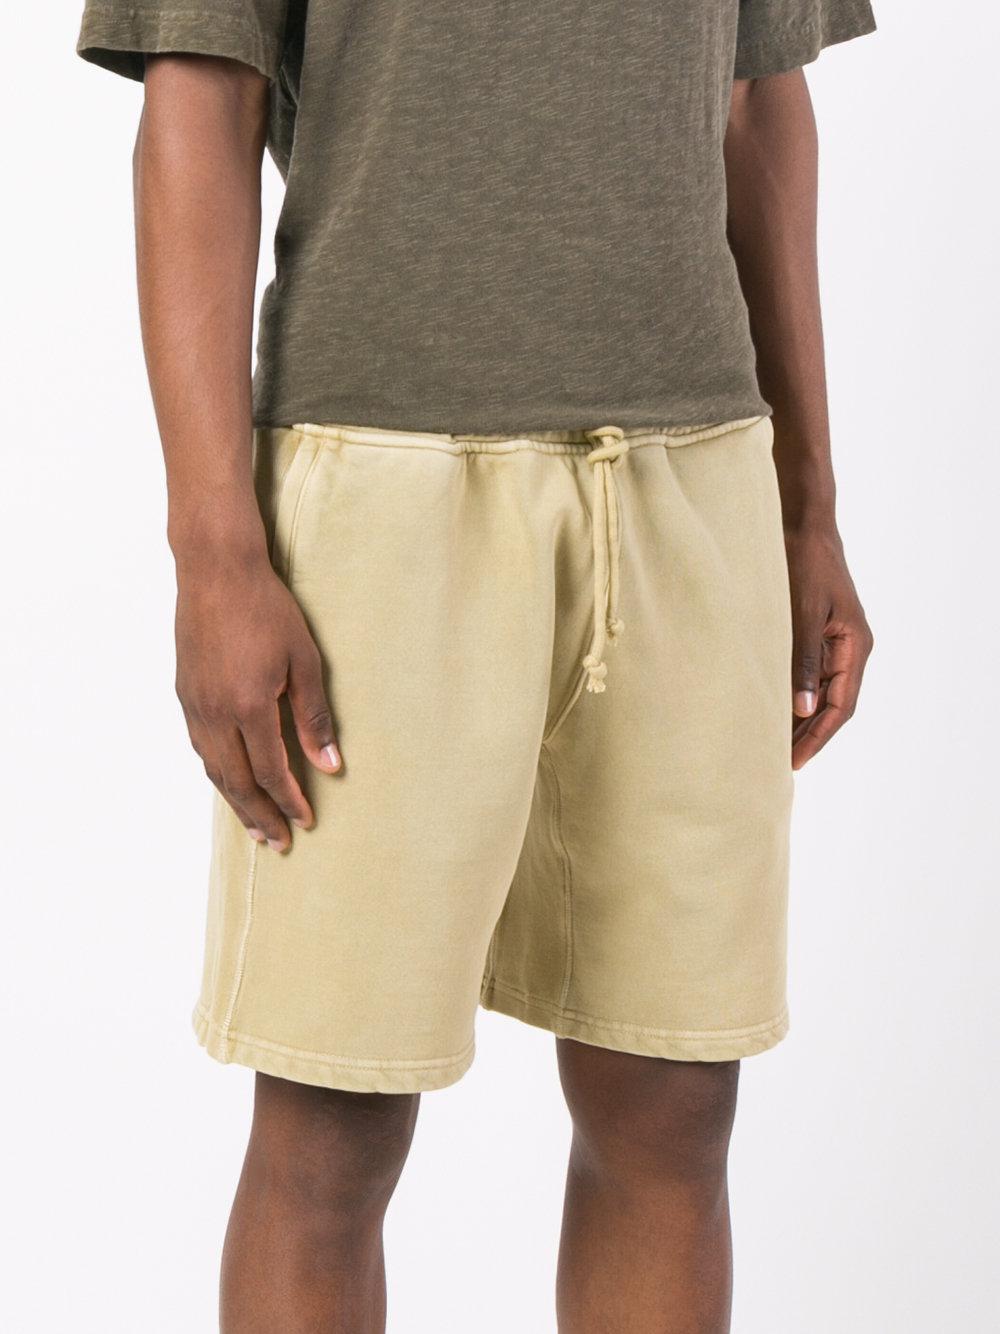 Lyst - Yeezy Classic Track Shorts in Natural for Men